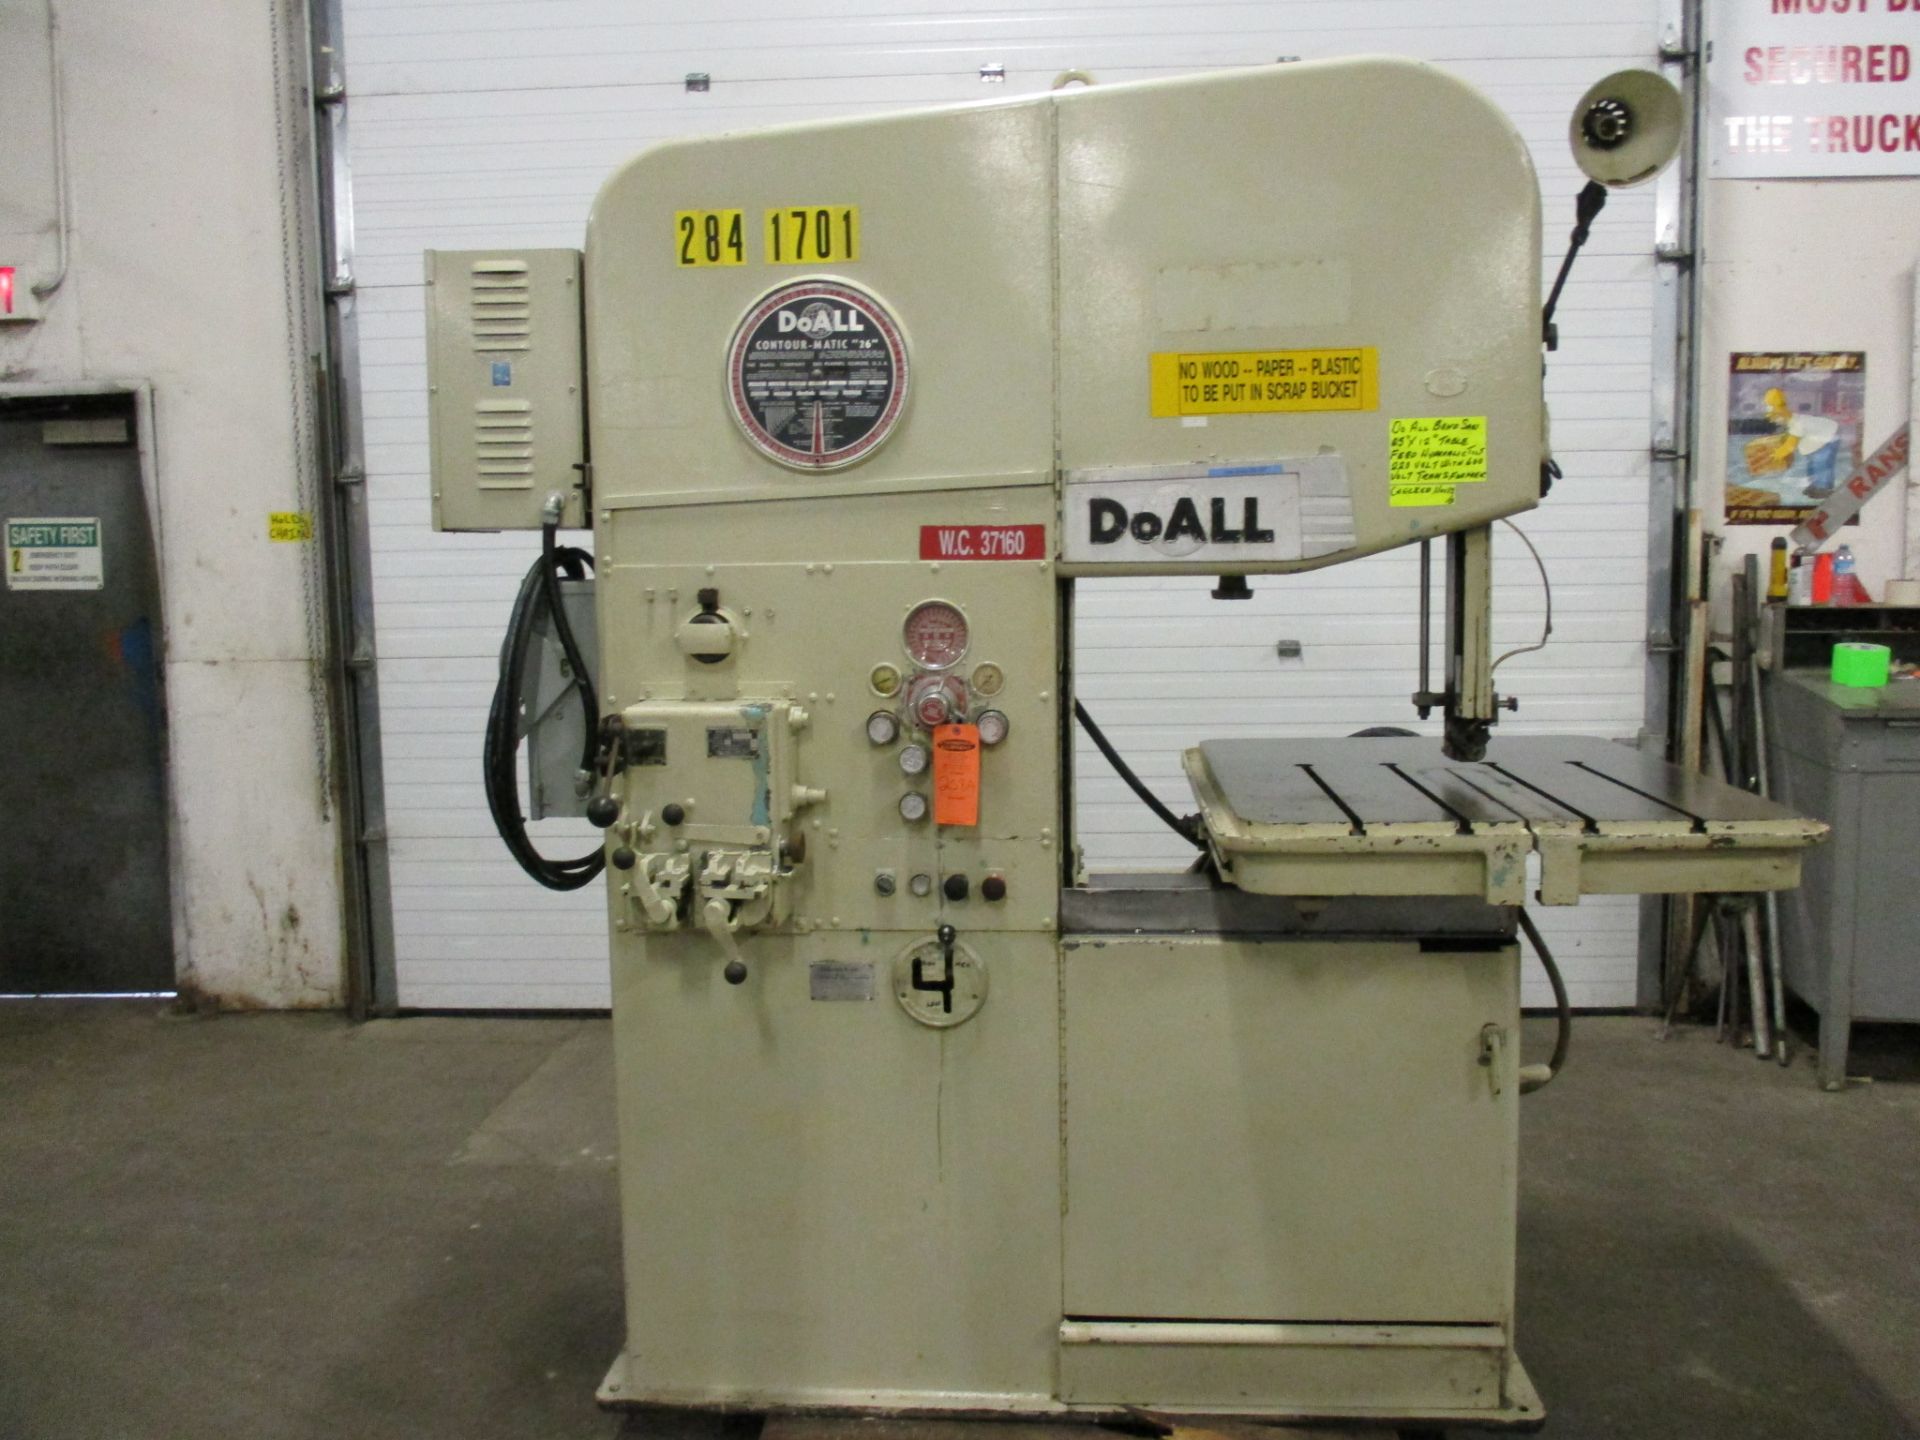 Doall Contour-Matic "26" Vertical Bandsaw with blade welder - 25" x 12" table - Feed & Hydraulic